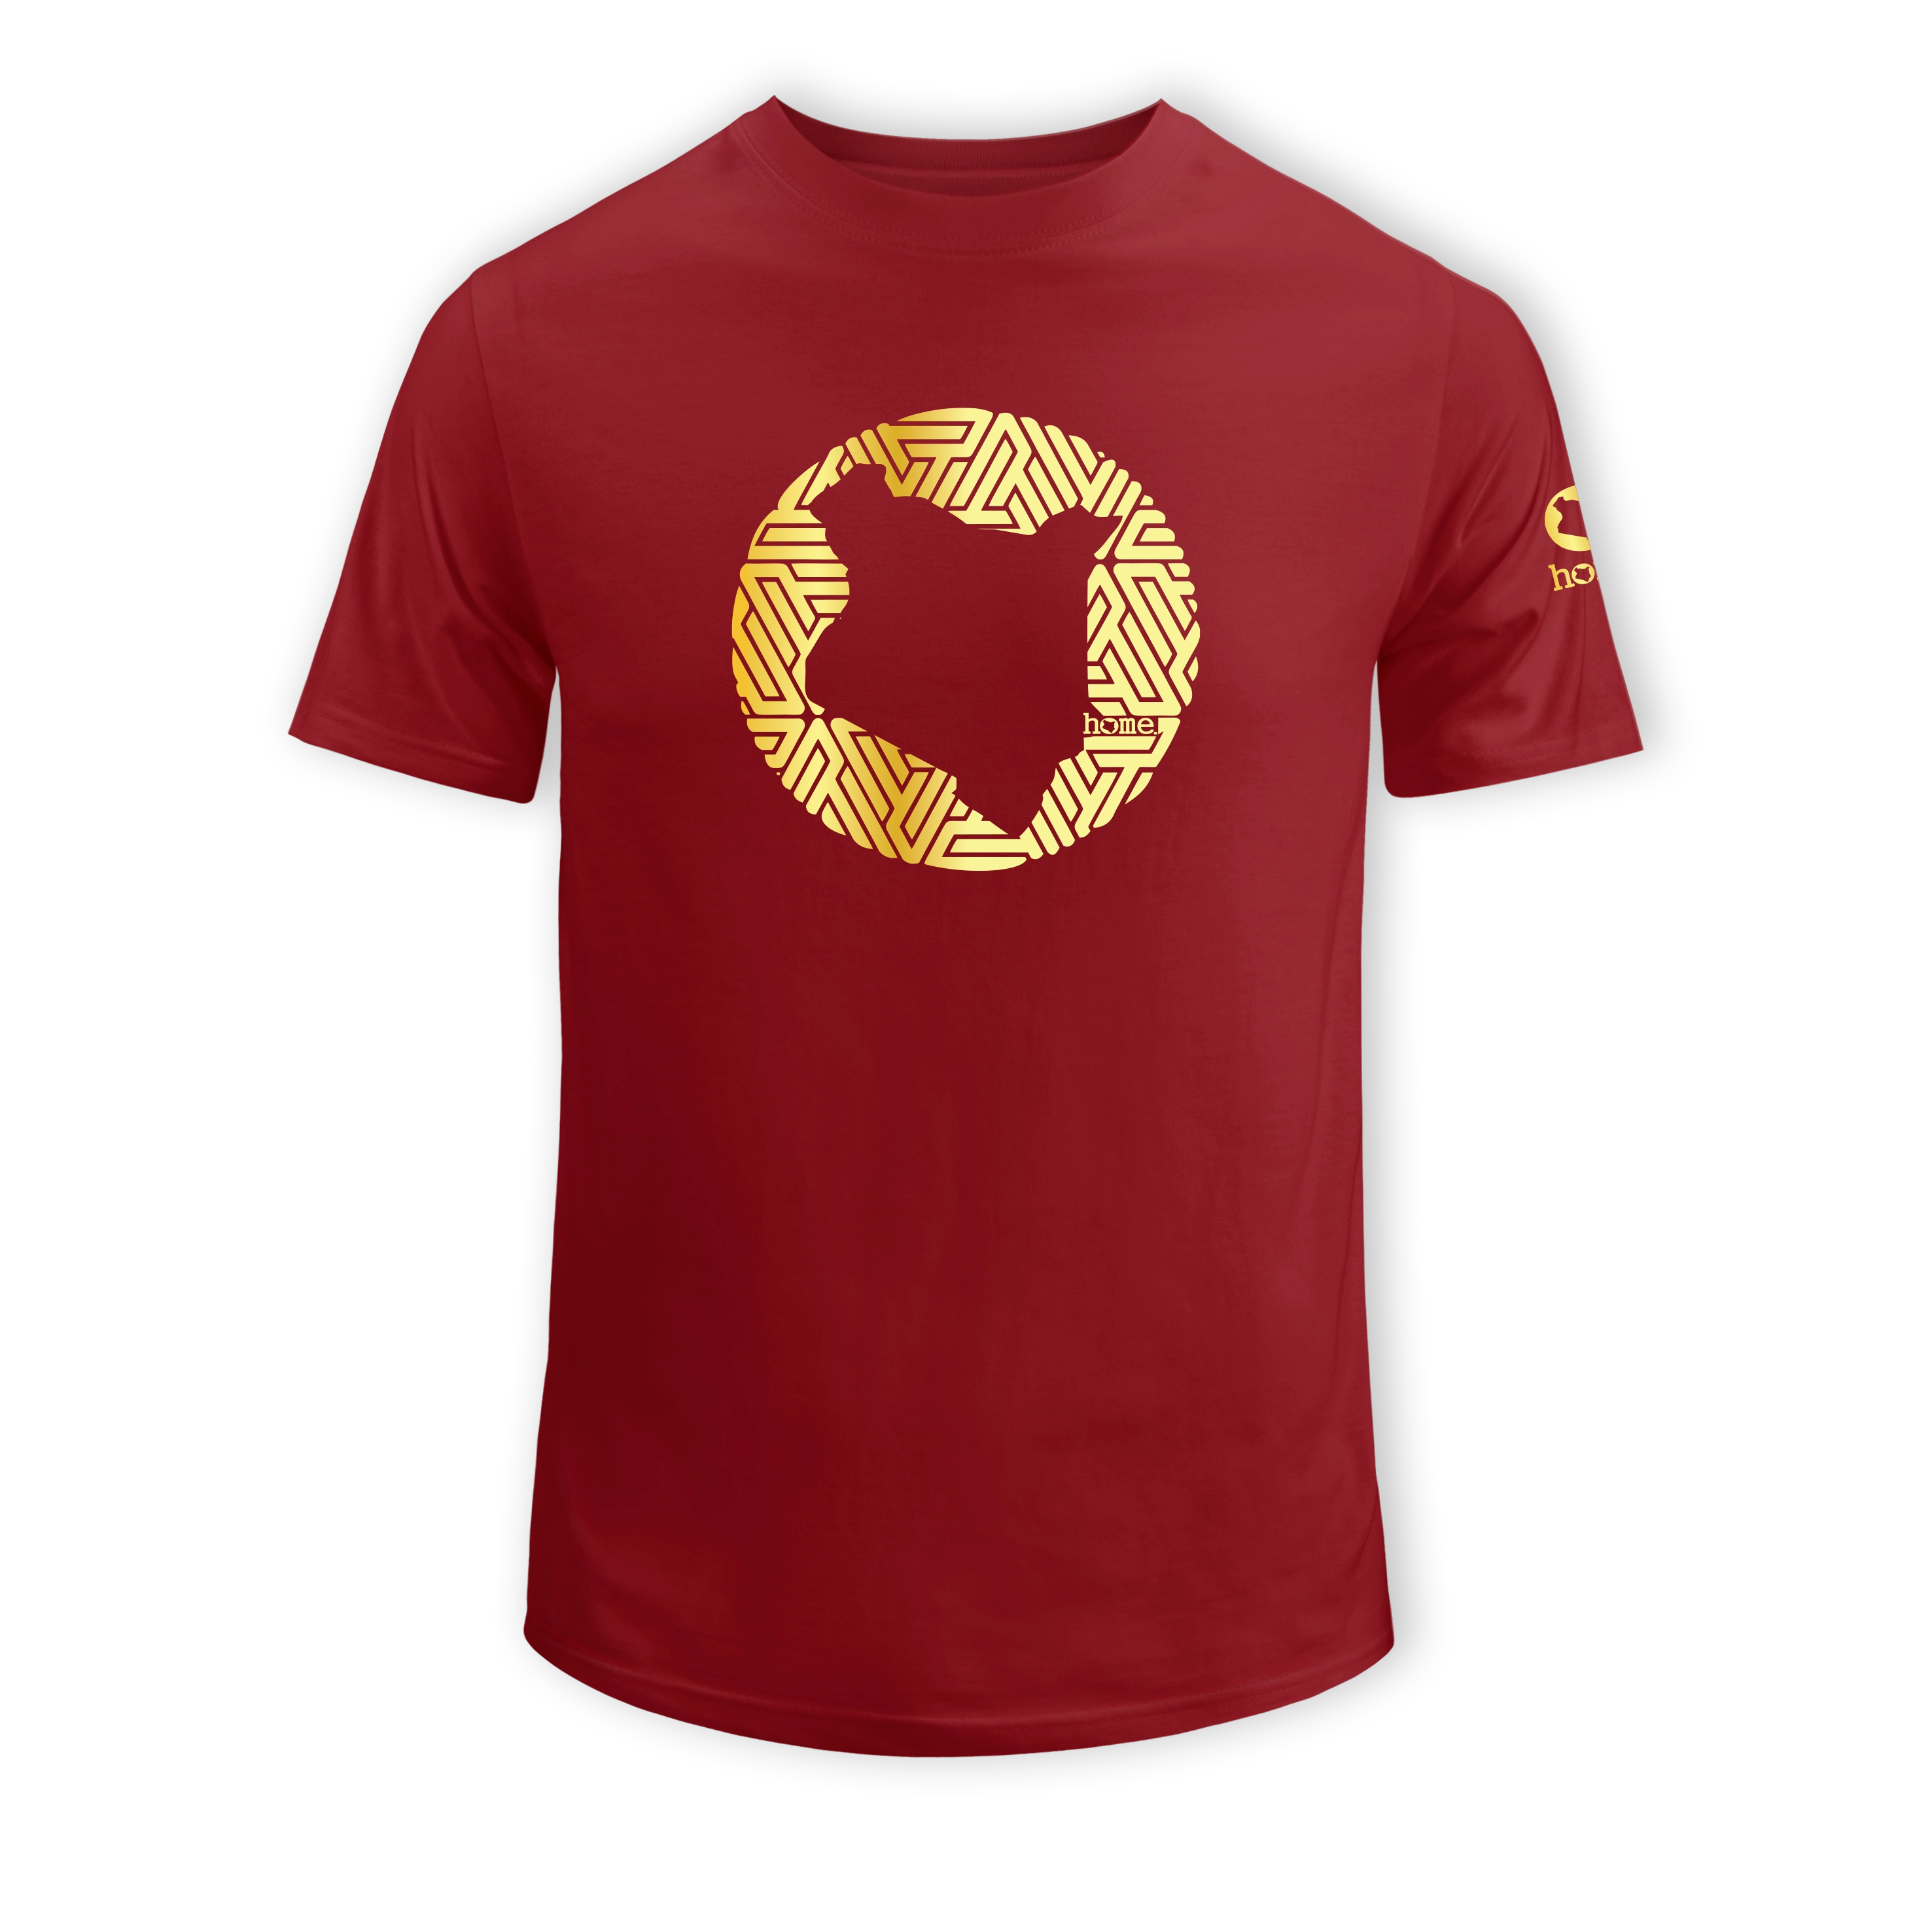 home_254 KIDS SHORT-SLEEVED MAROON RED T-SHIRT WITH A GOLD MAP PRINT – COTTON PLUS FABRIC